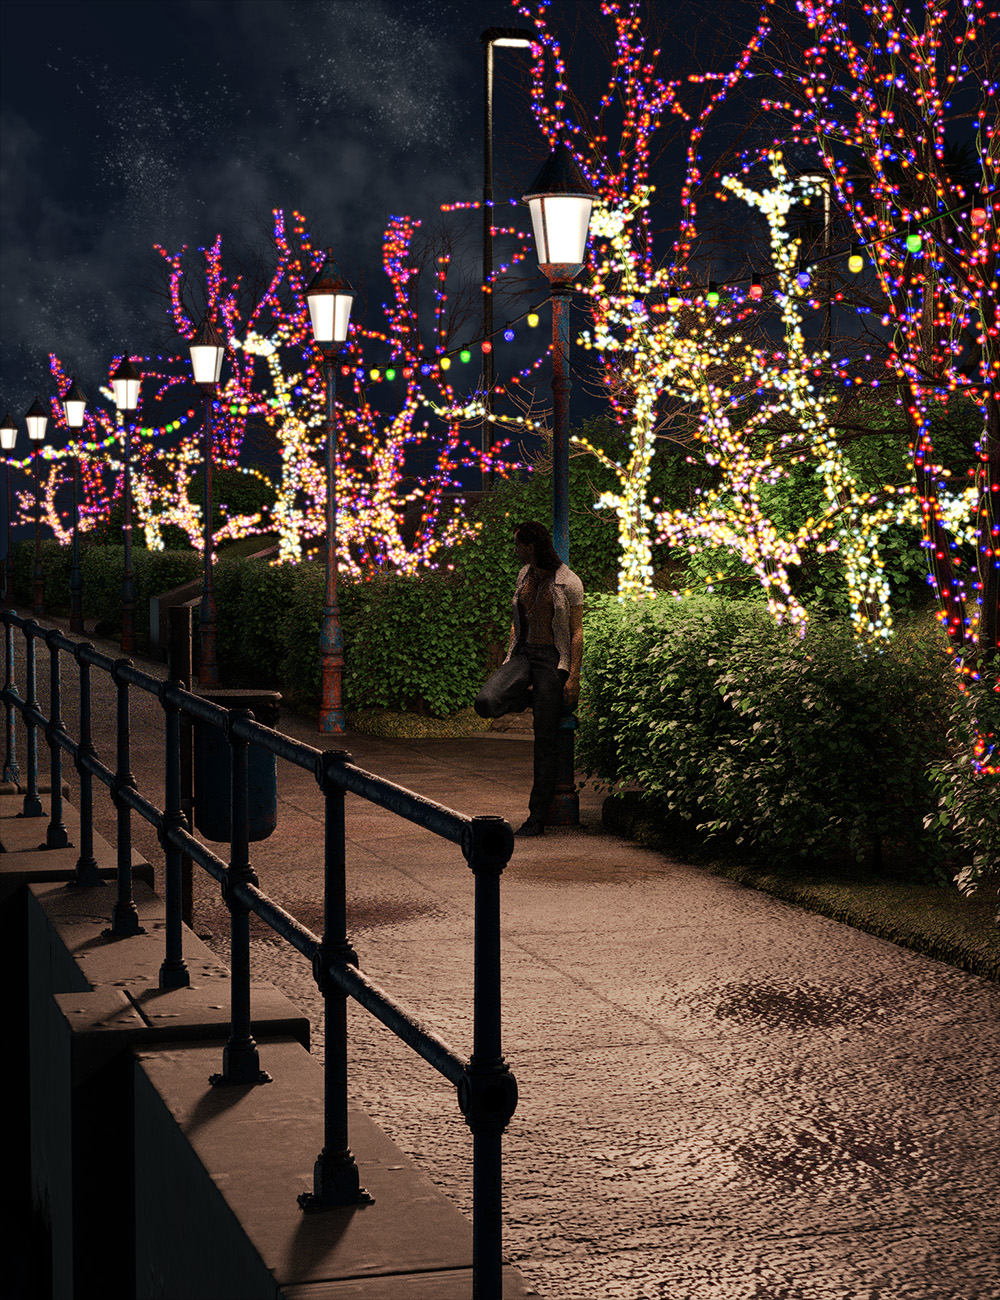 Lit Trees - Trees with Fairy Lights for Iray by: MartinJFrost, 3D Models by Daz 3D